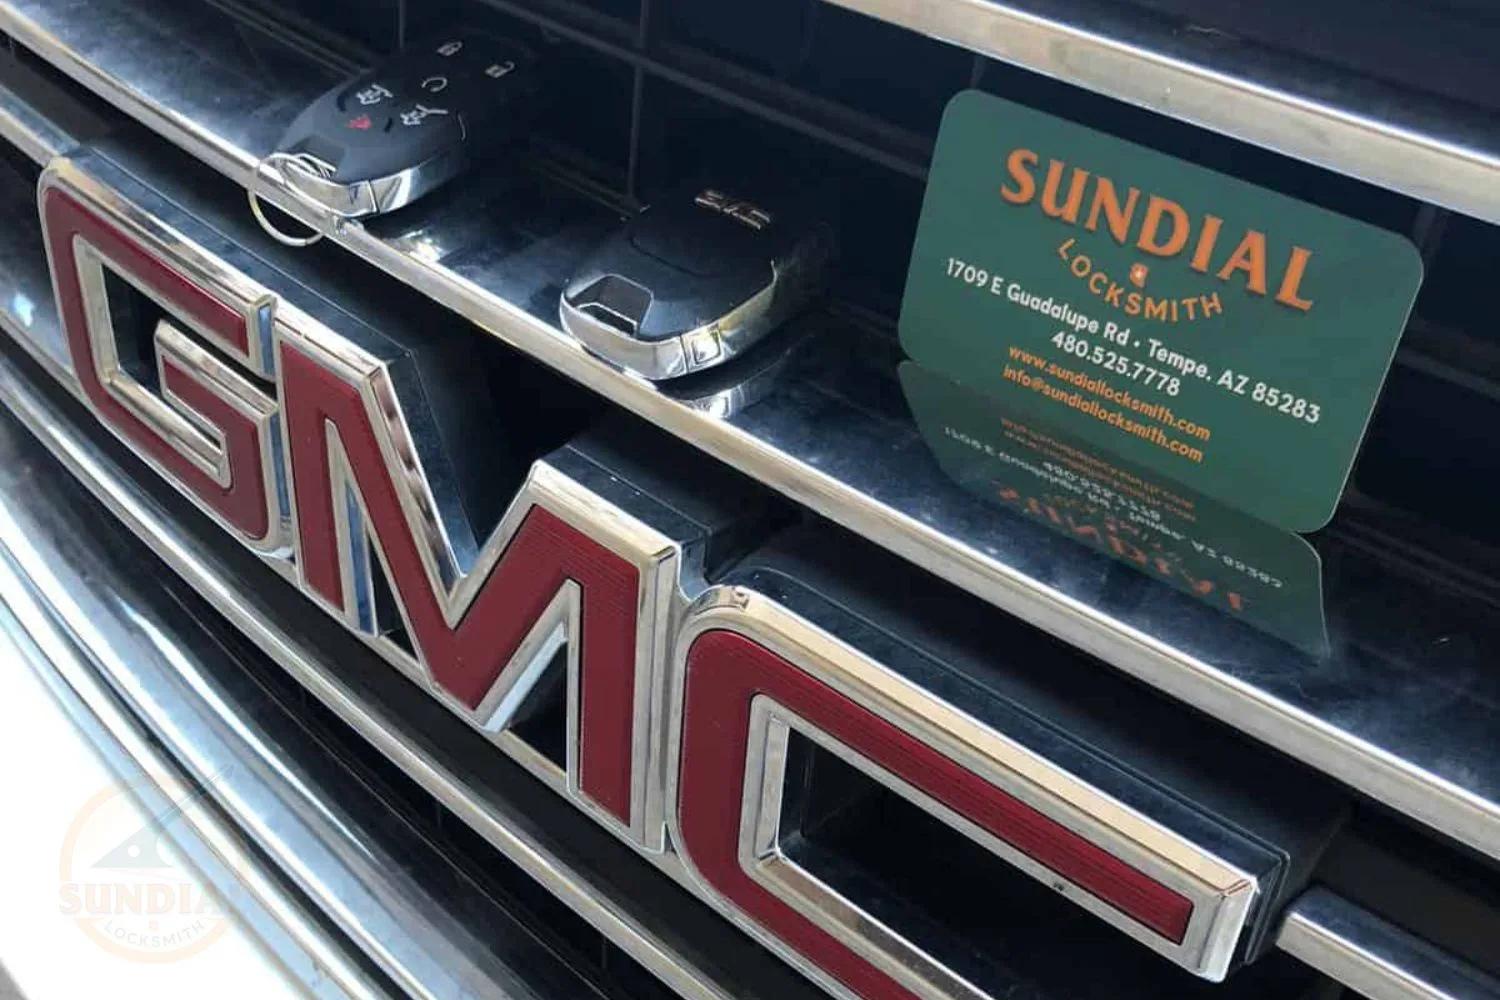 Two car key fobs and a Sundial Locksmith business card placed on the chrome grille of a vehicle with the GMC logo